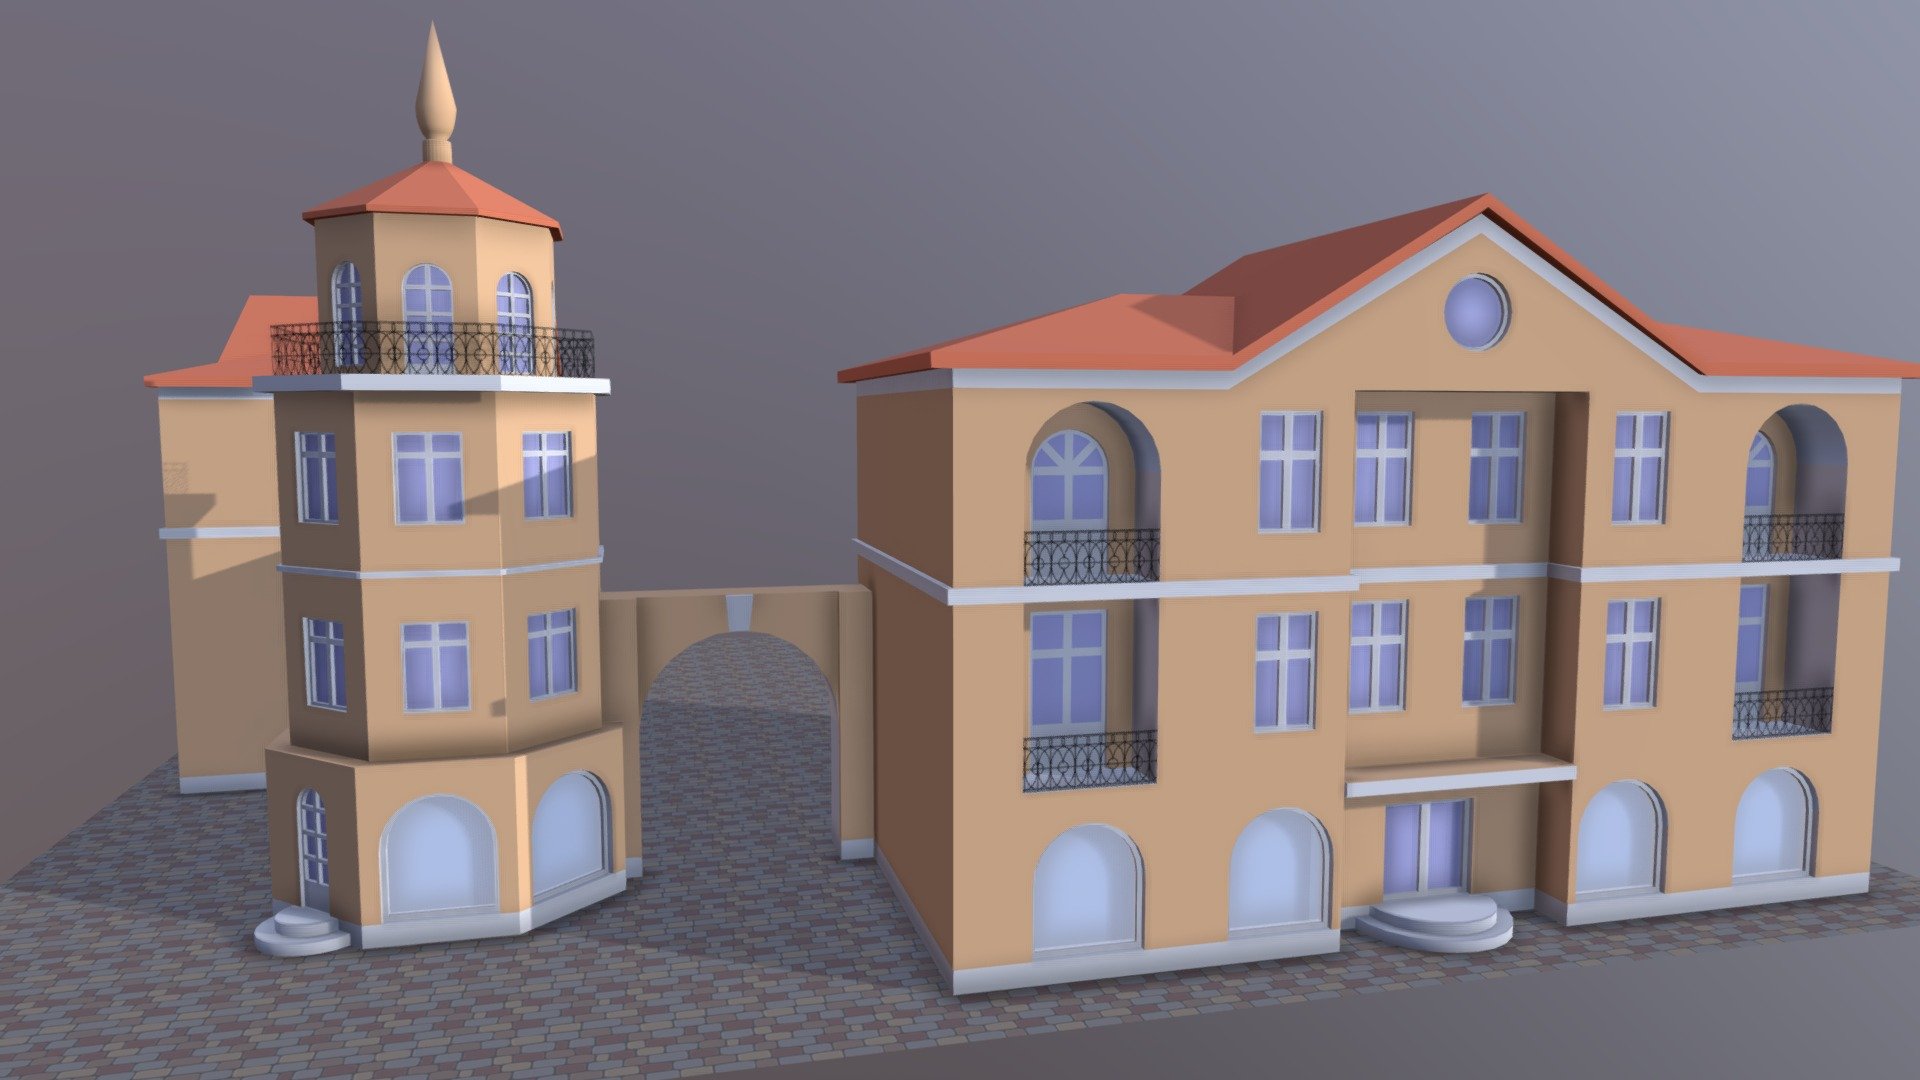 Small pack of fictioanl buildings. Can be used in case of nedidng residental buldings with shops on first floor. Corner tower are rother technicla building than living.
Made by @yellika optimized by @Moora and me. Part of our Forest Riders driving simualtor game 3d model